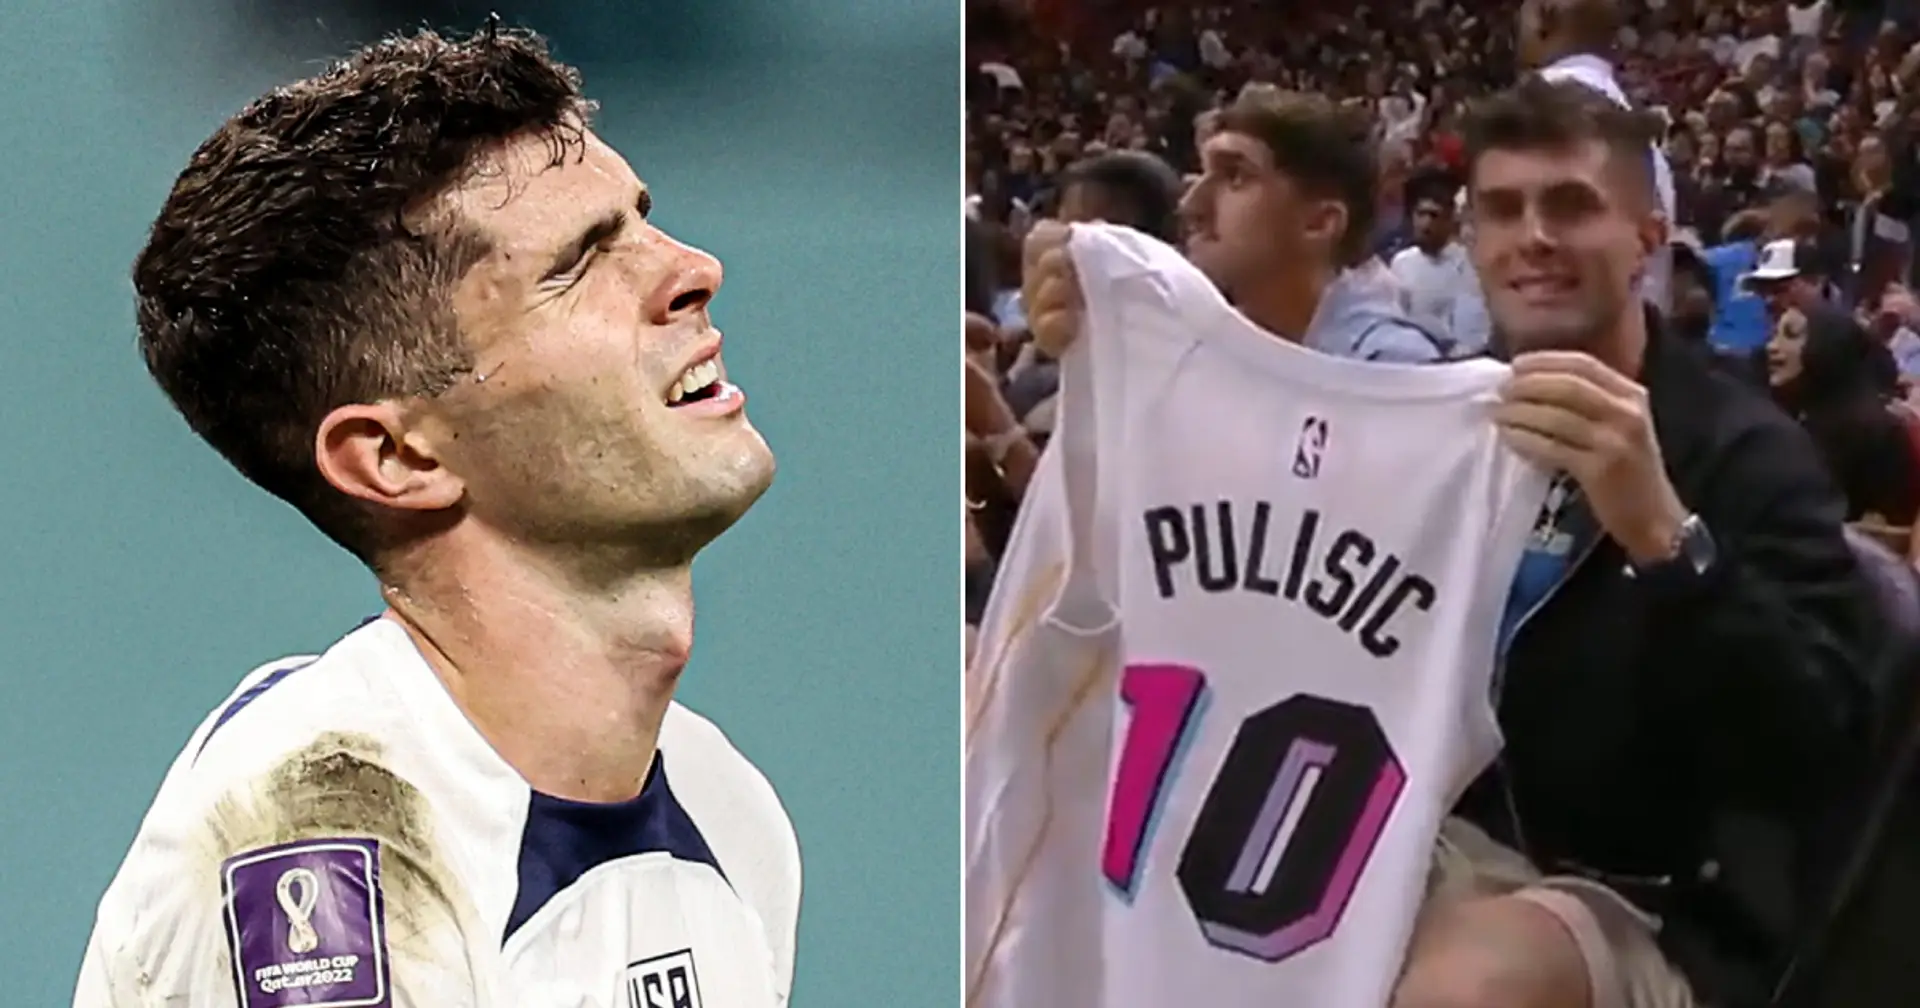 Christian Pulisic spotted at NBA game as he rests after World Cup exit